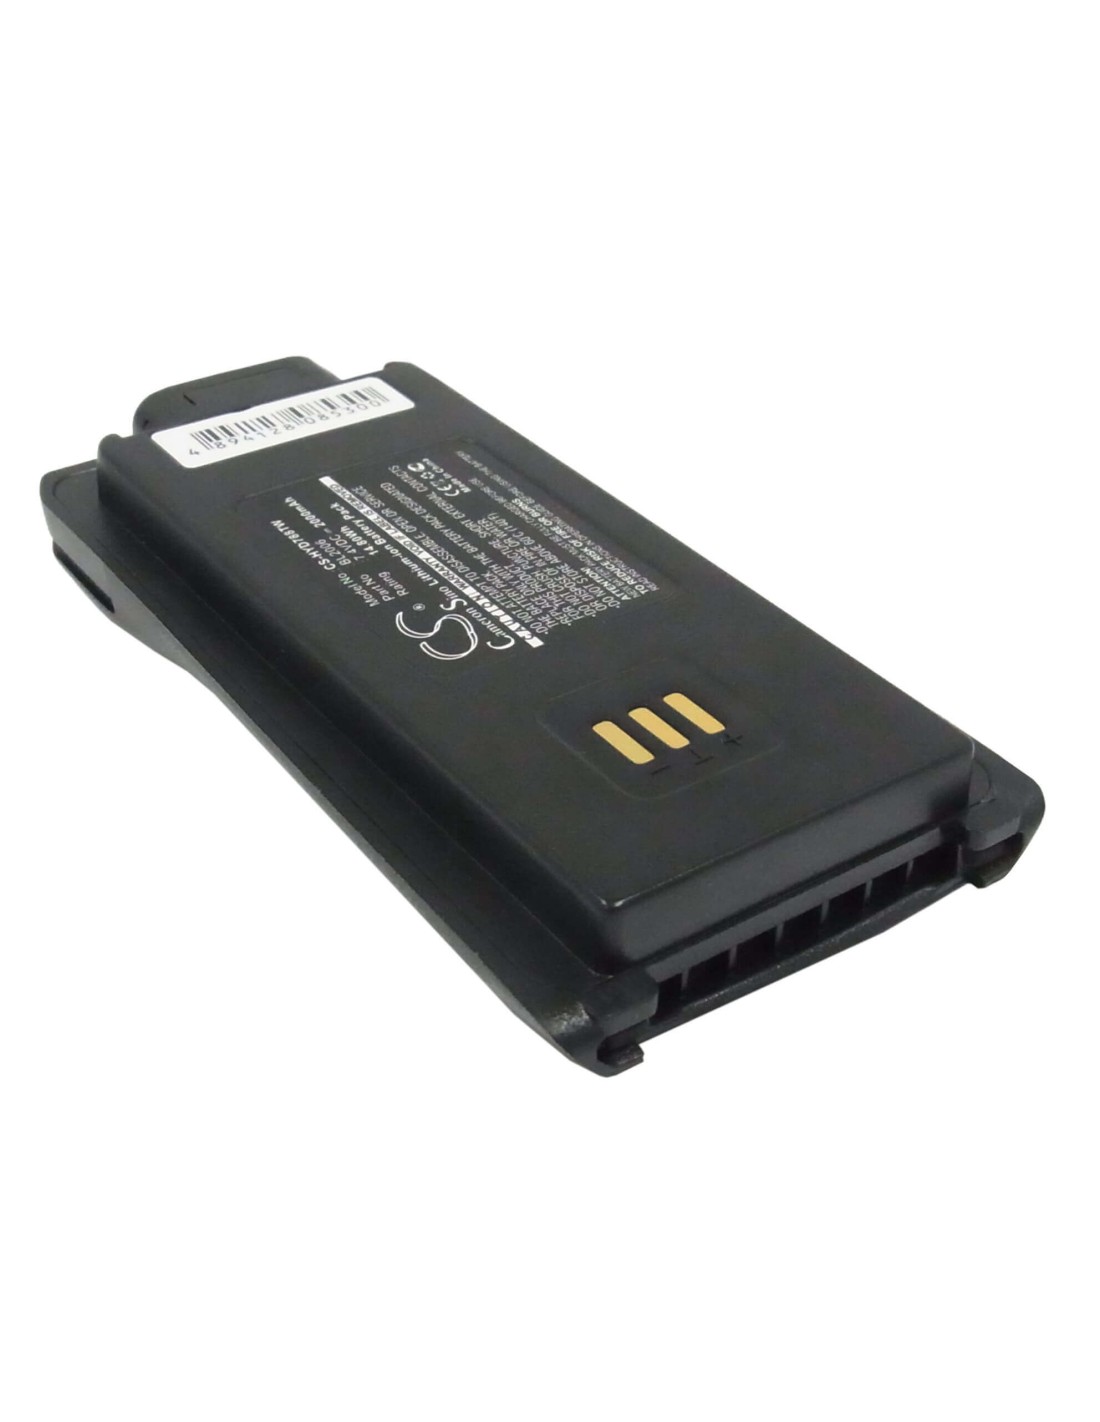 Battery for Hyt Pd788, Pd780 7.4V, 2000mAh - 14.80Wh